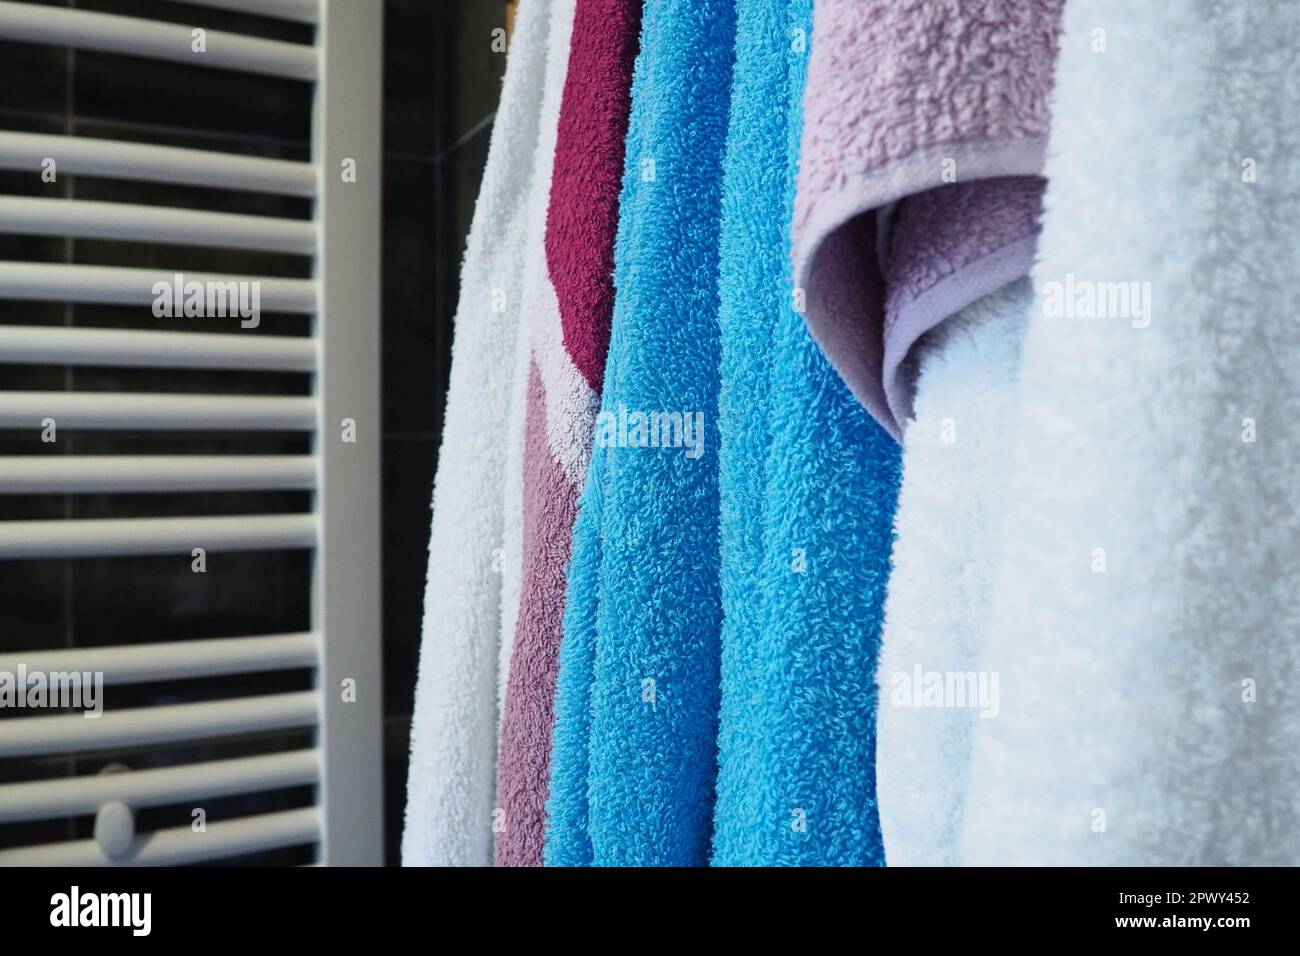 Towels hang next to a heated towel rail, wall radiator or radiator. White, blue, pink, red towels. Organization of household items in the bathroom. Ho Stock Photo